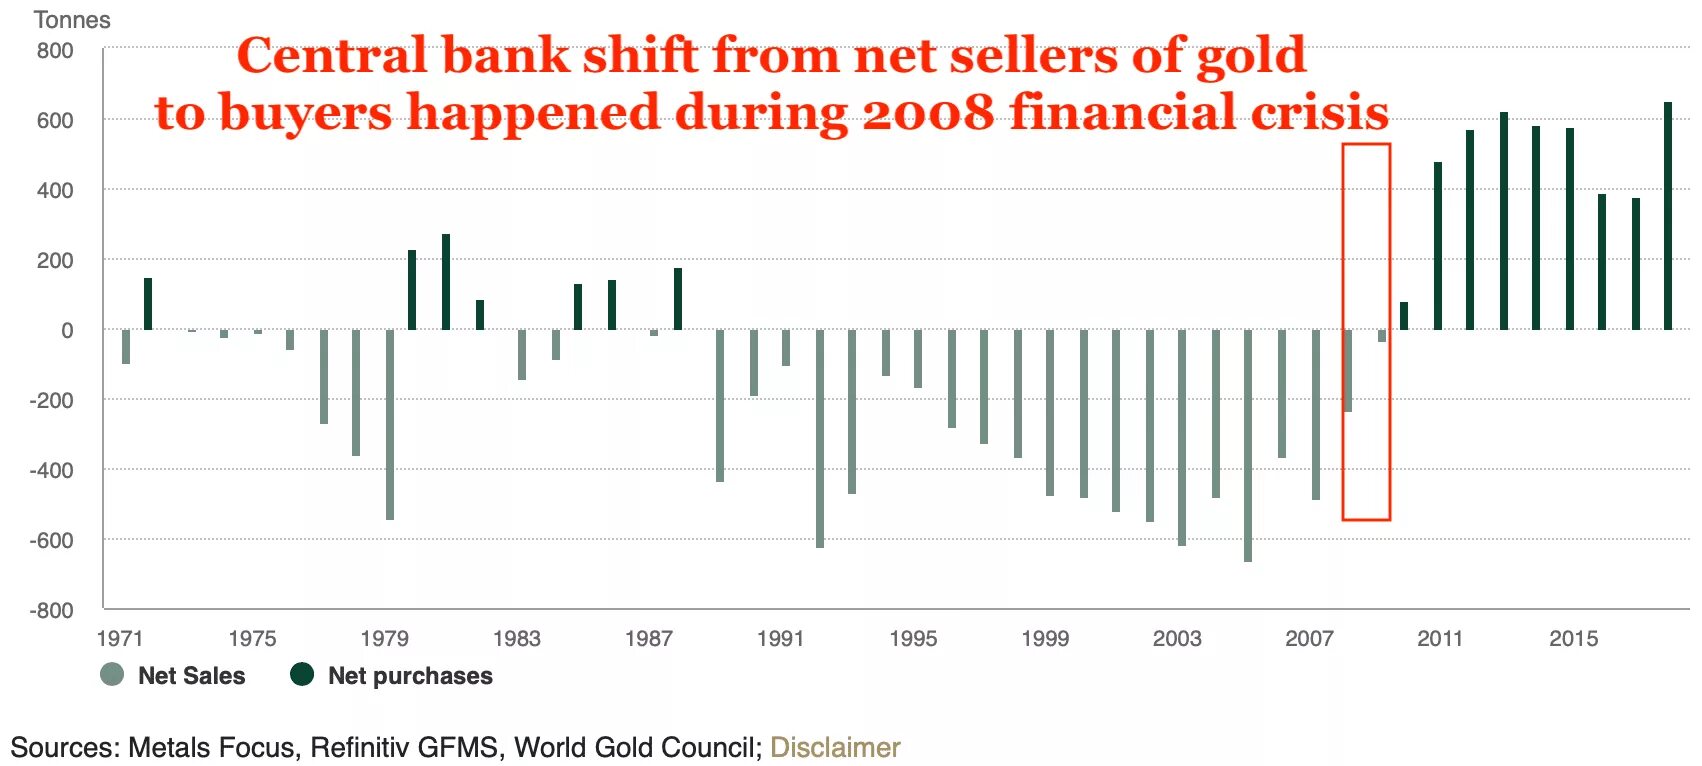 Ton to rub. Central Bank Gold demand. Central Bank Gold consumption. 2007 Financial crisis and Banks. Gold demand structure.